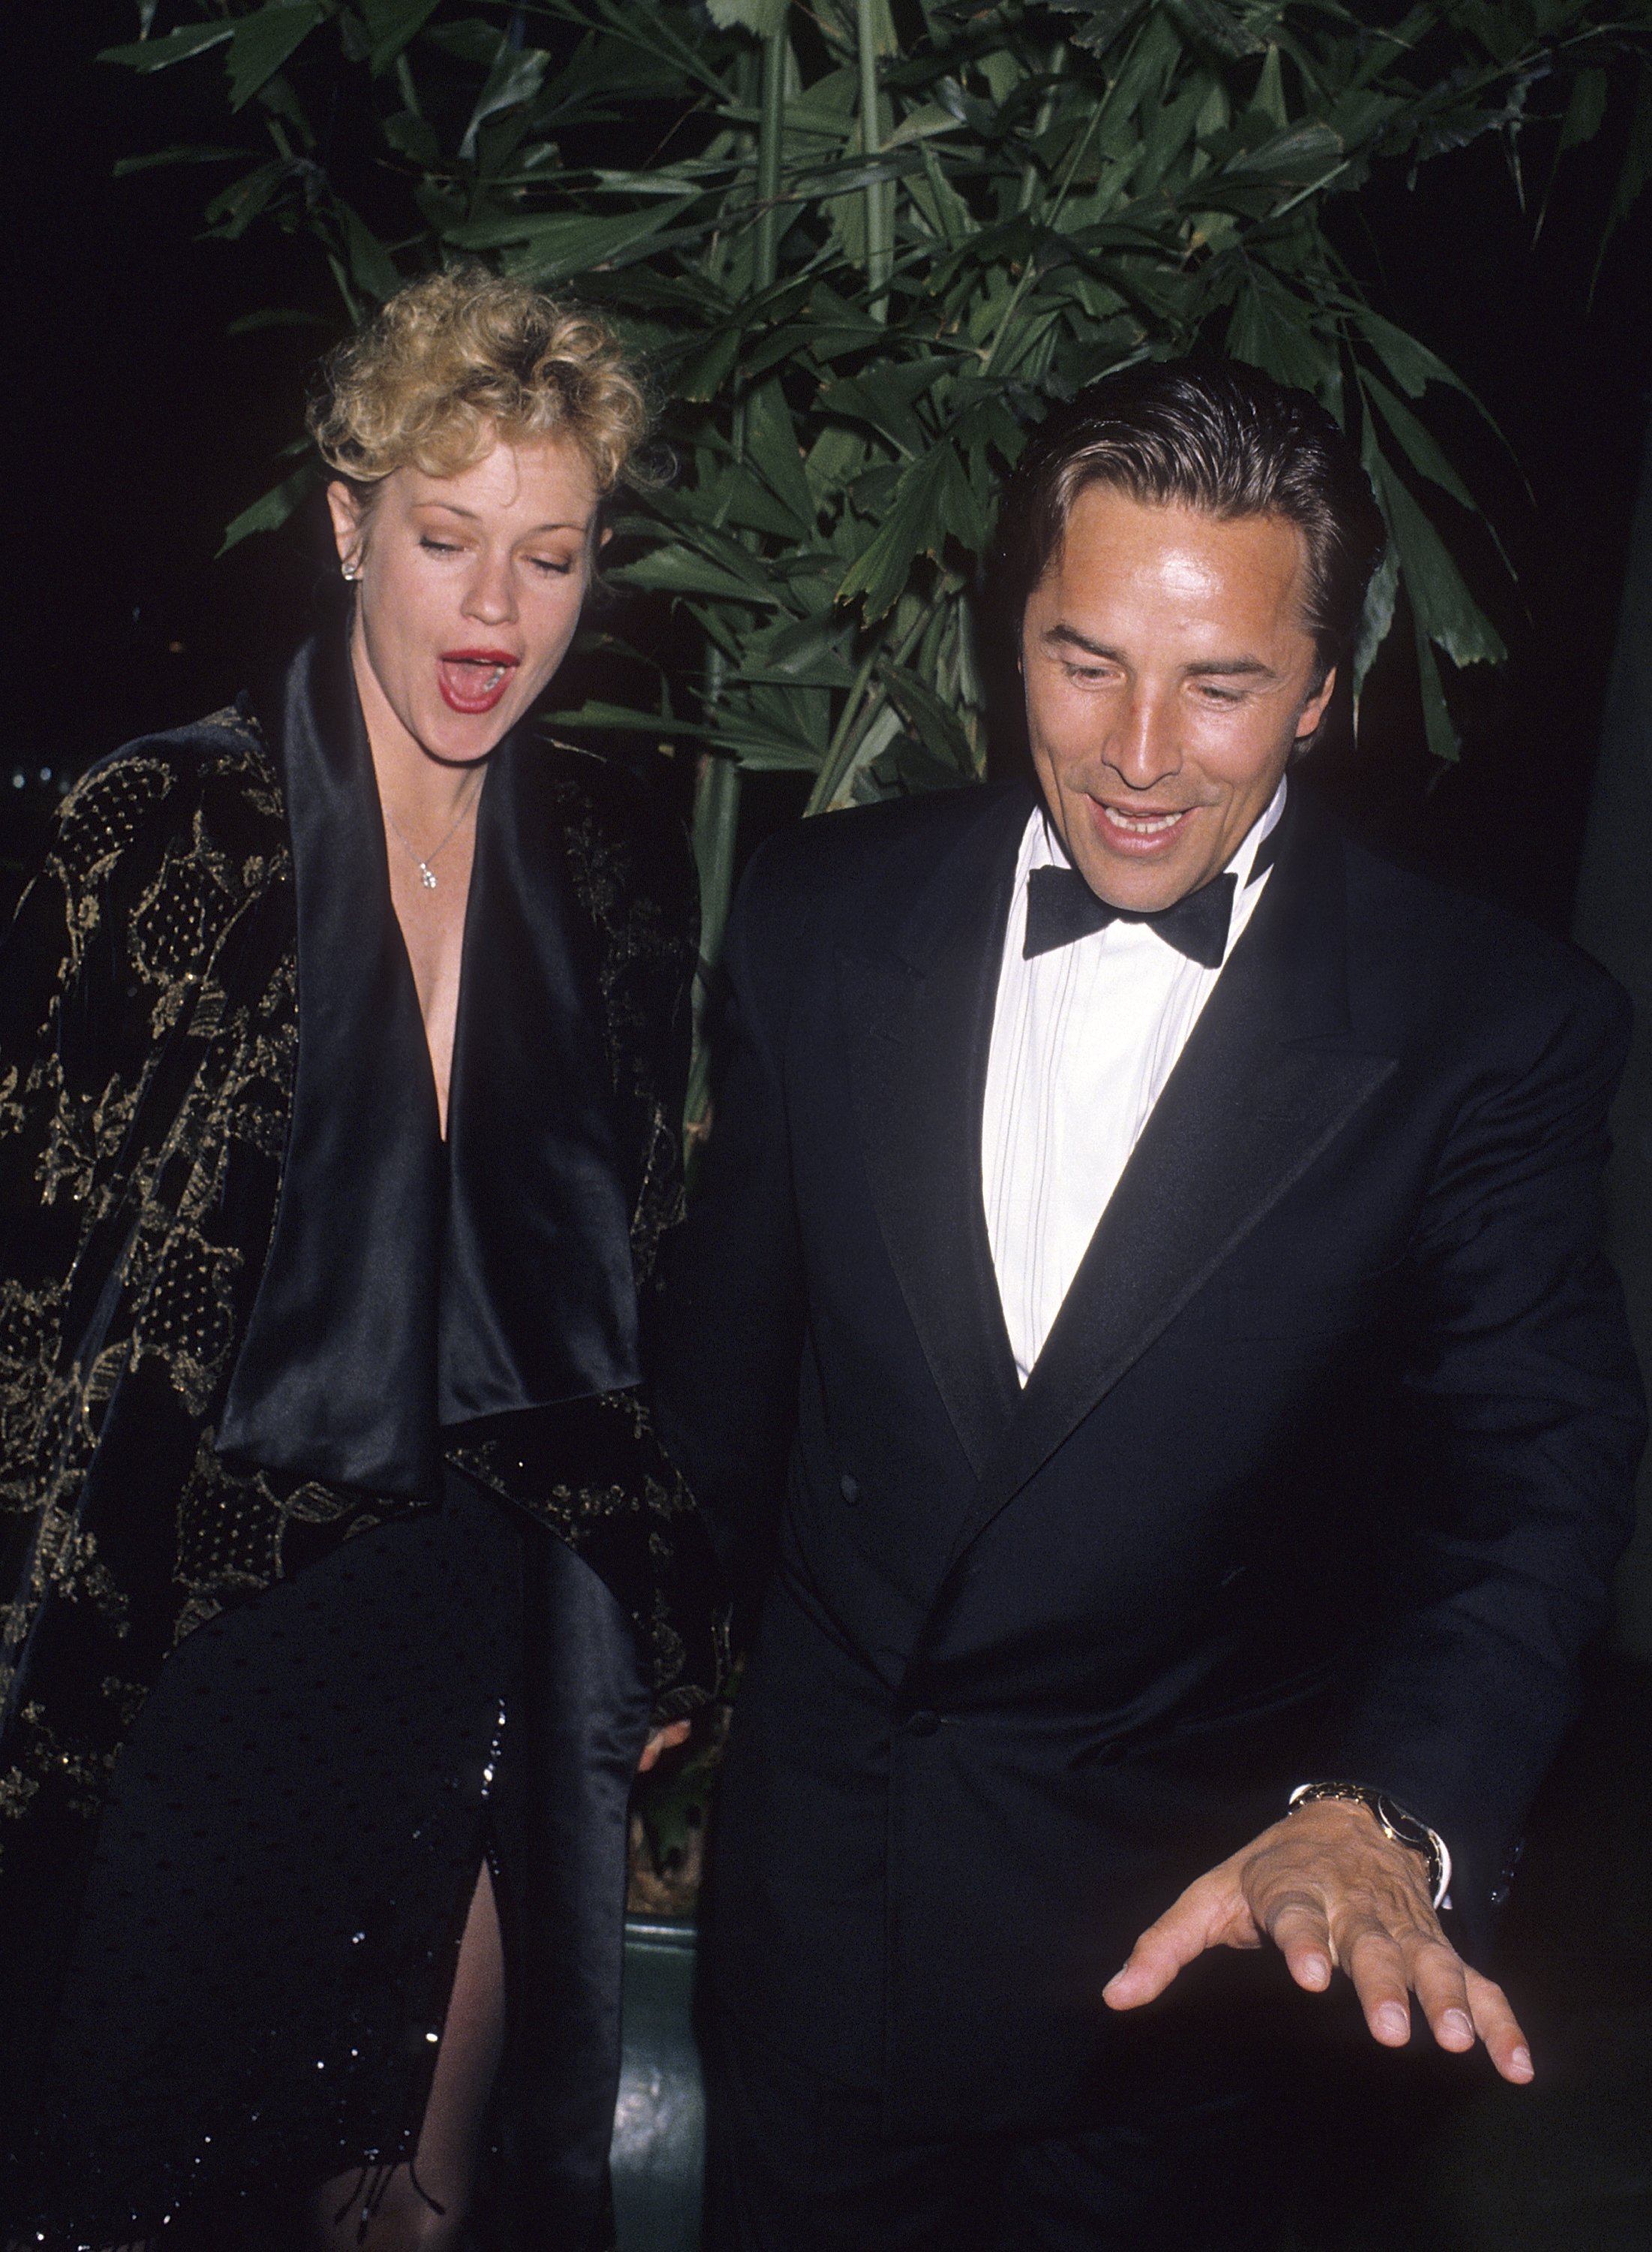 Melanie Griffith and Don Johnson photographed the first annual ball of fire and ice to benefit the Revlon / UCLA Women's Cancer Research Program in 1990. |  Photo: Getty Images